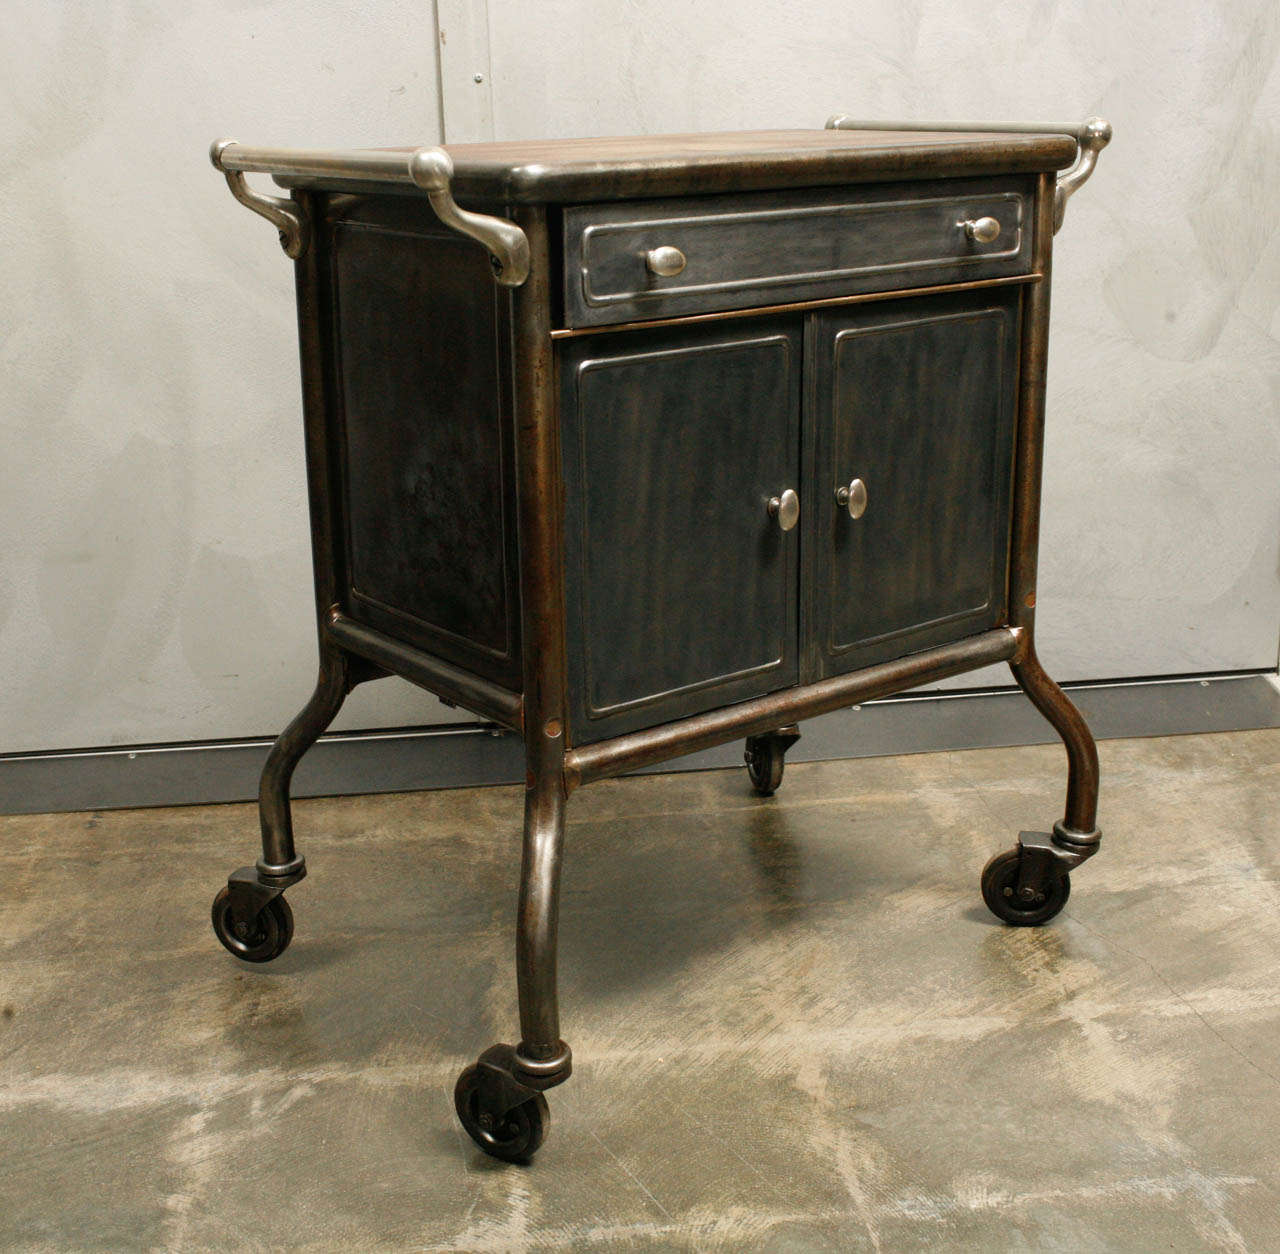 This little cabinet on curved legs with elegant handles is a beautiful piece with a refinished wooden top. The cabinet could be used as an end table, or storage for an office or parlor.